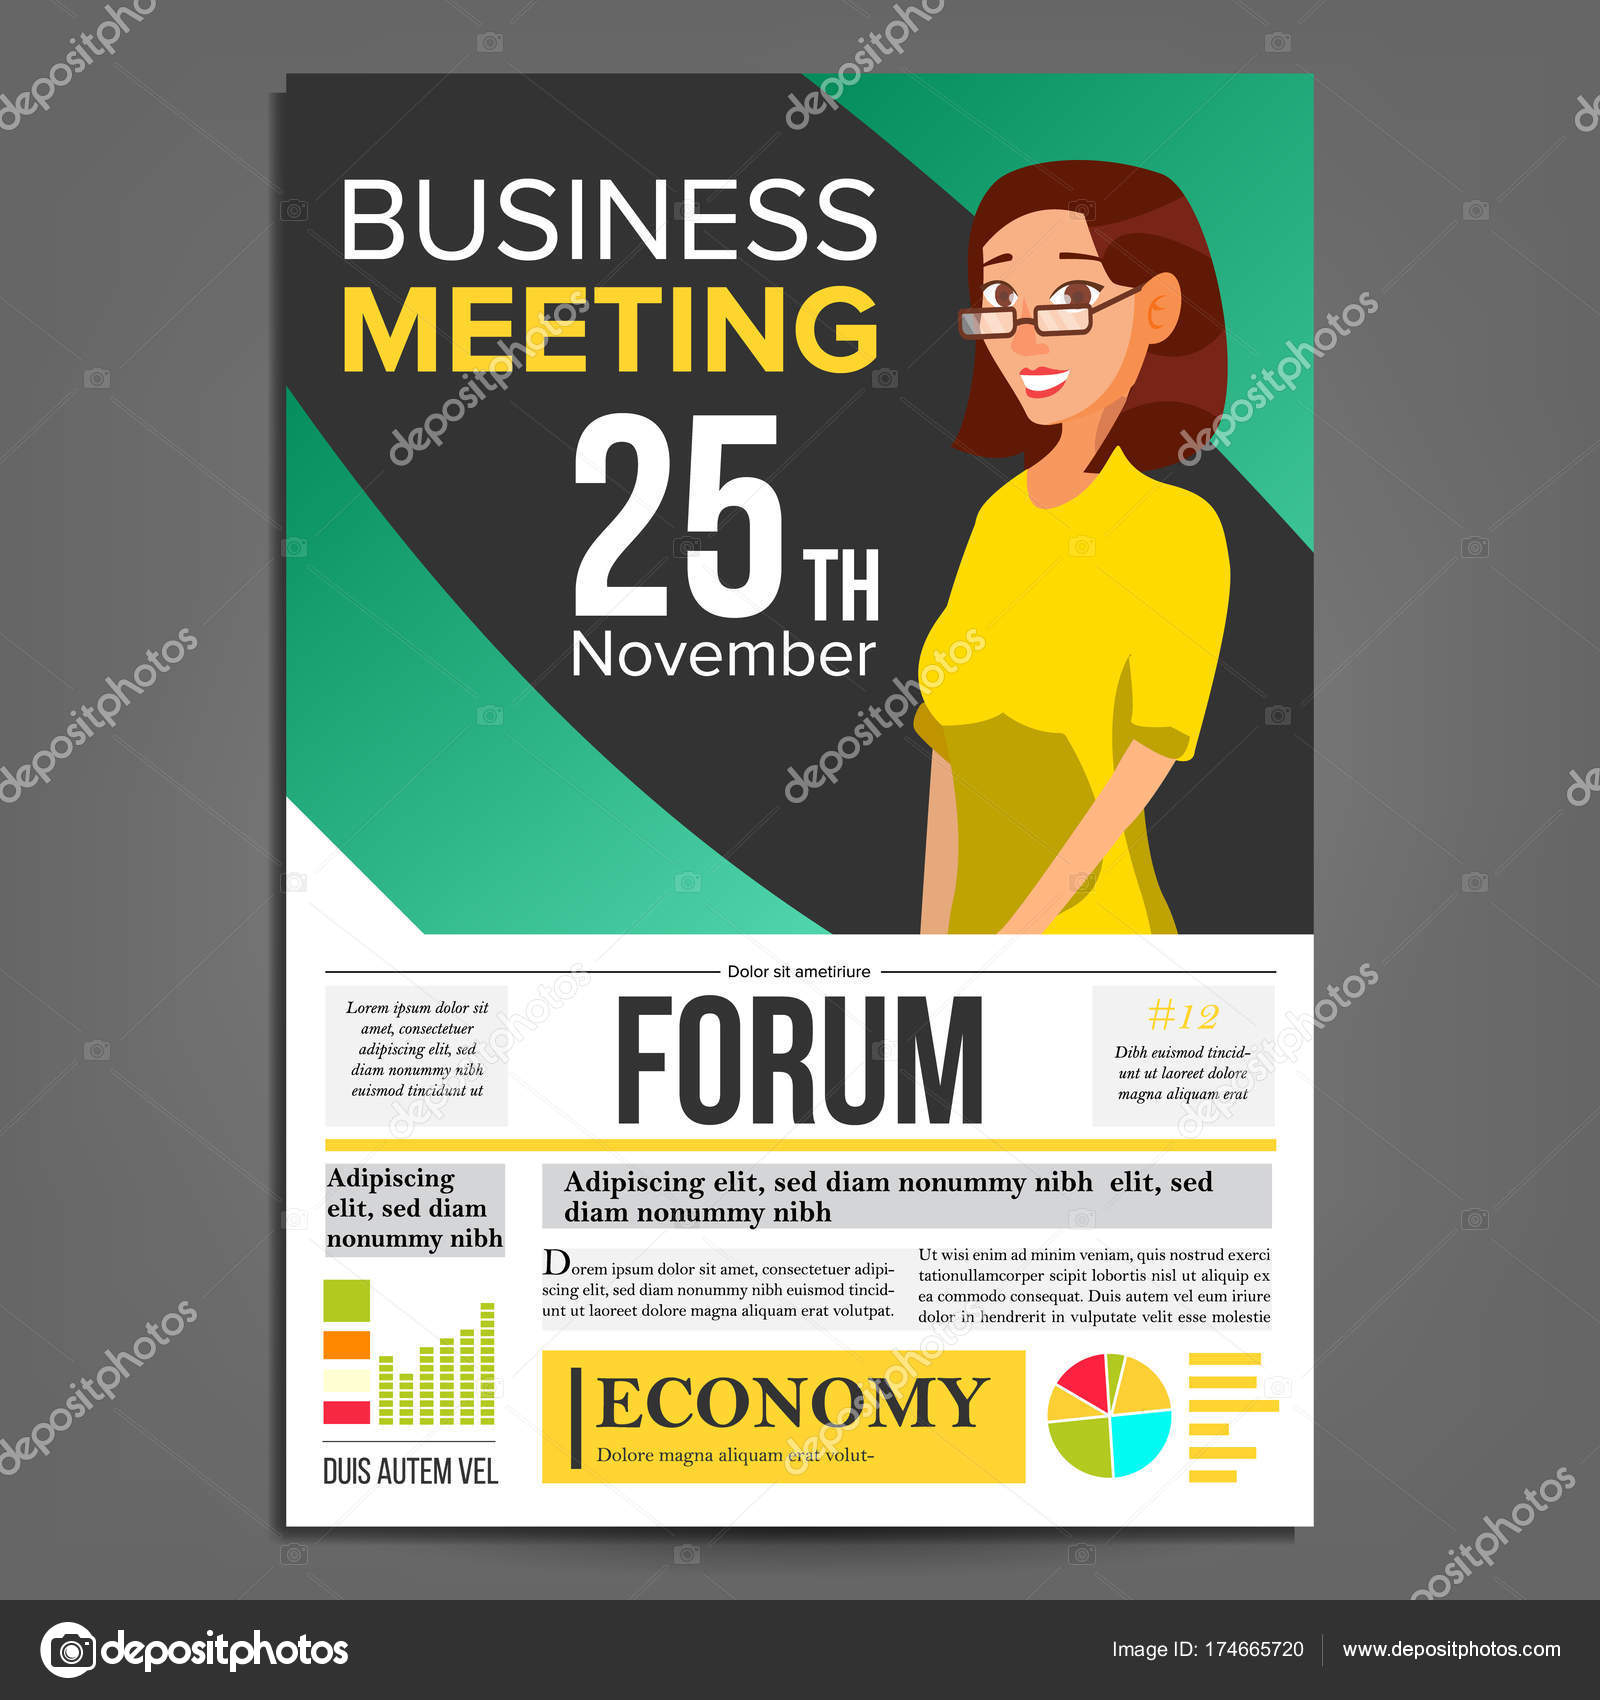 Business Meeting Poster Vector. Business Woman. Invitation With Meeting Flyer Template